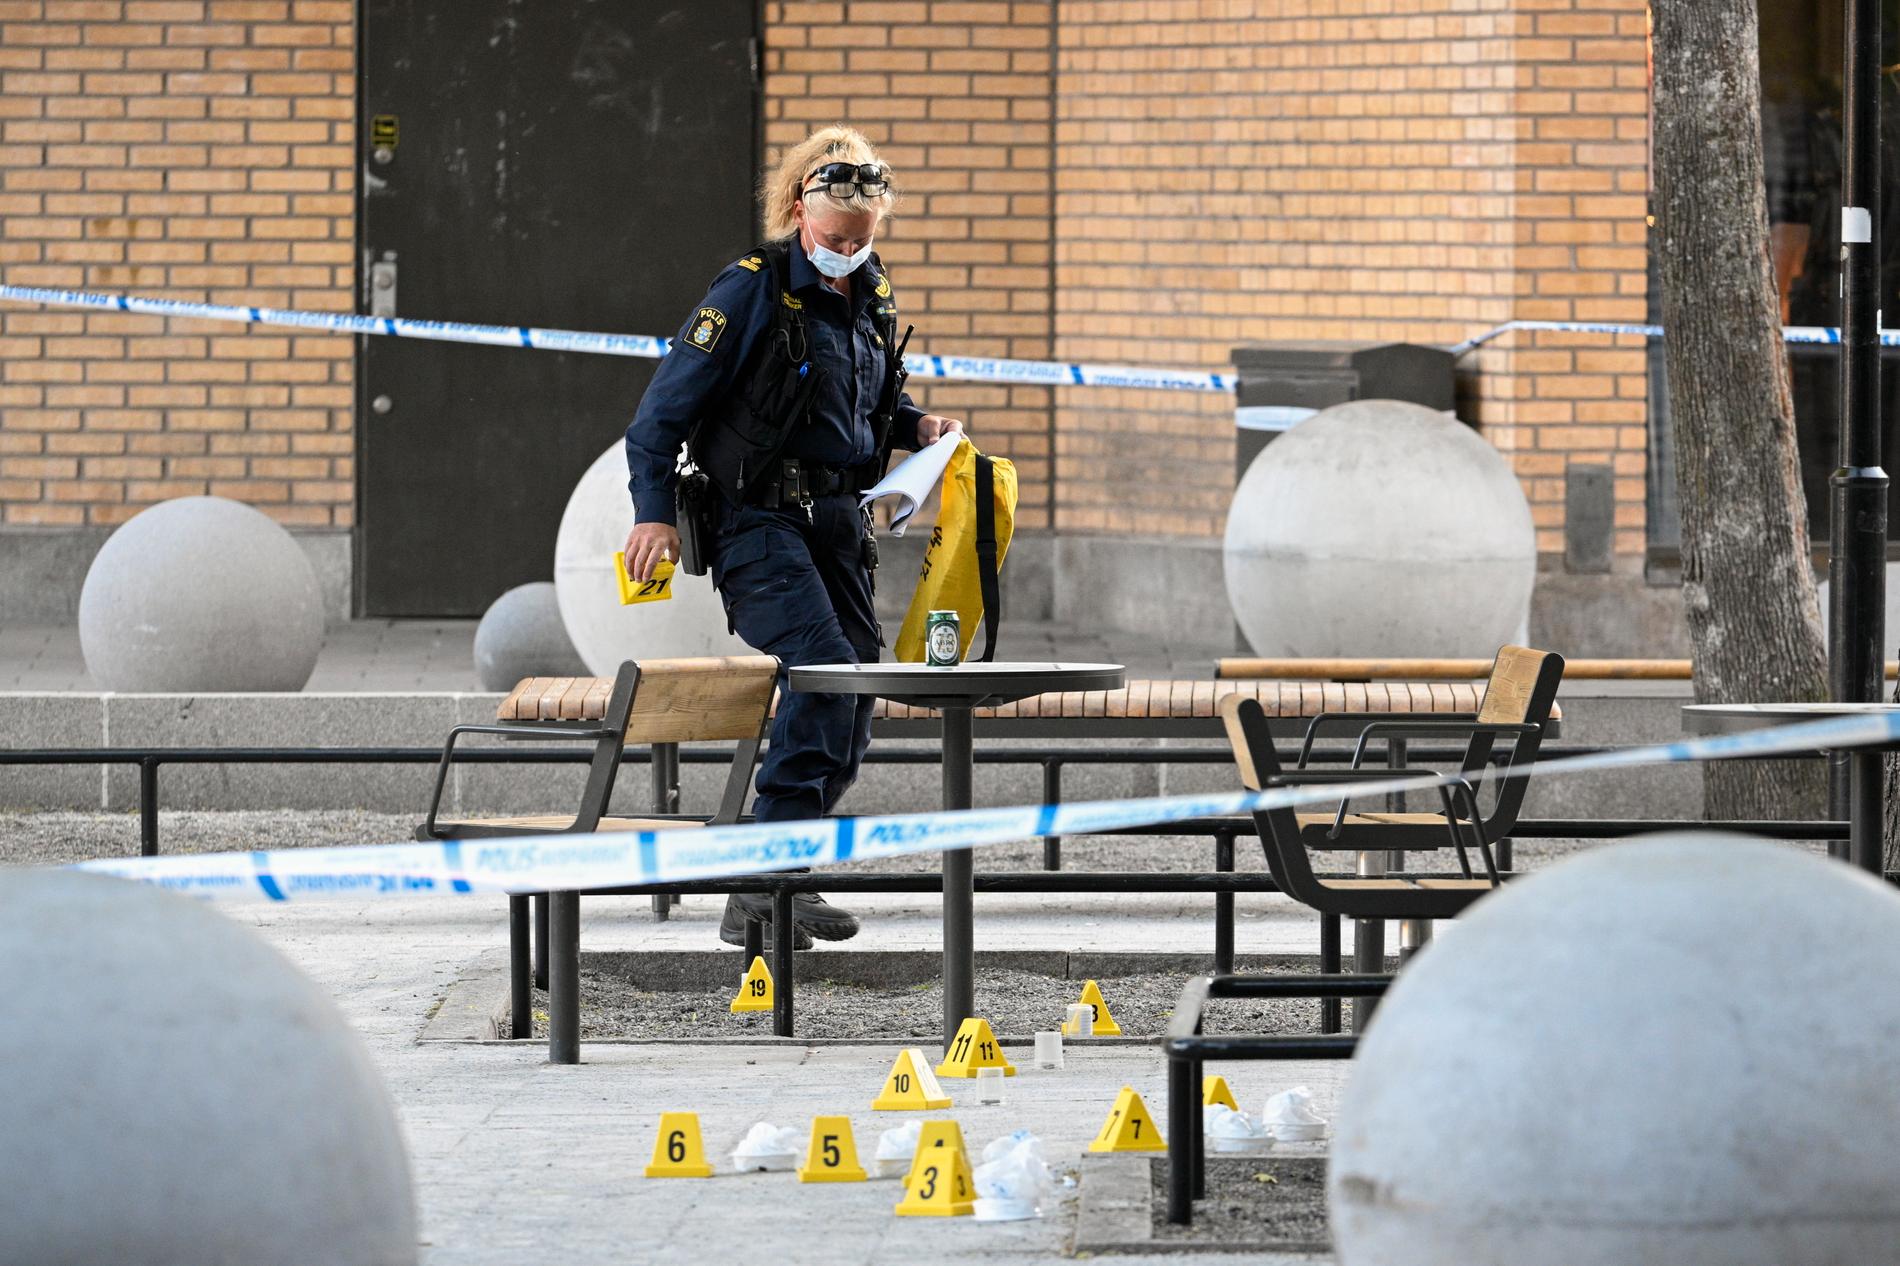 A 15-year-old has been shot dead in Sweden – and three others have been hospitalised